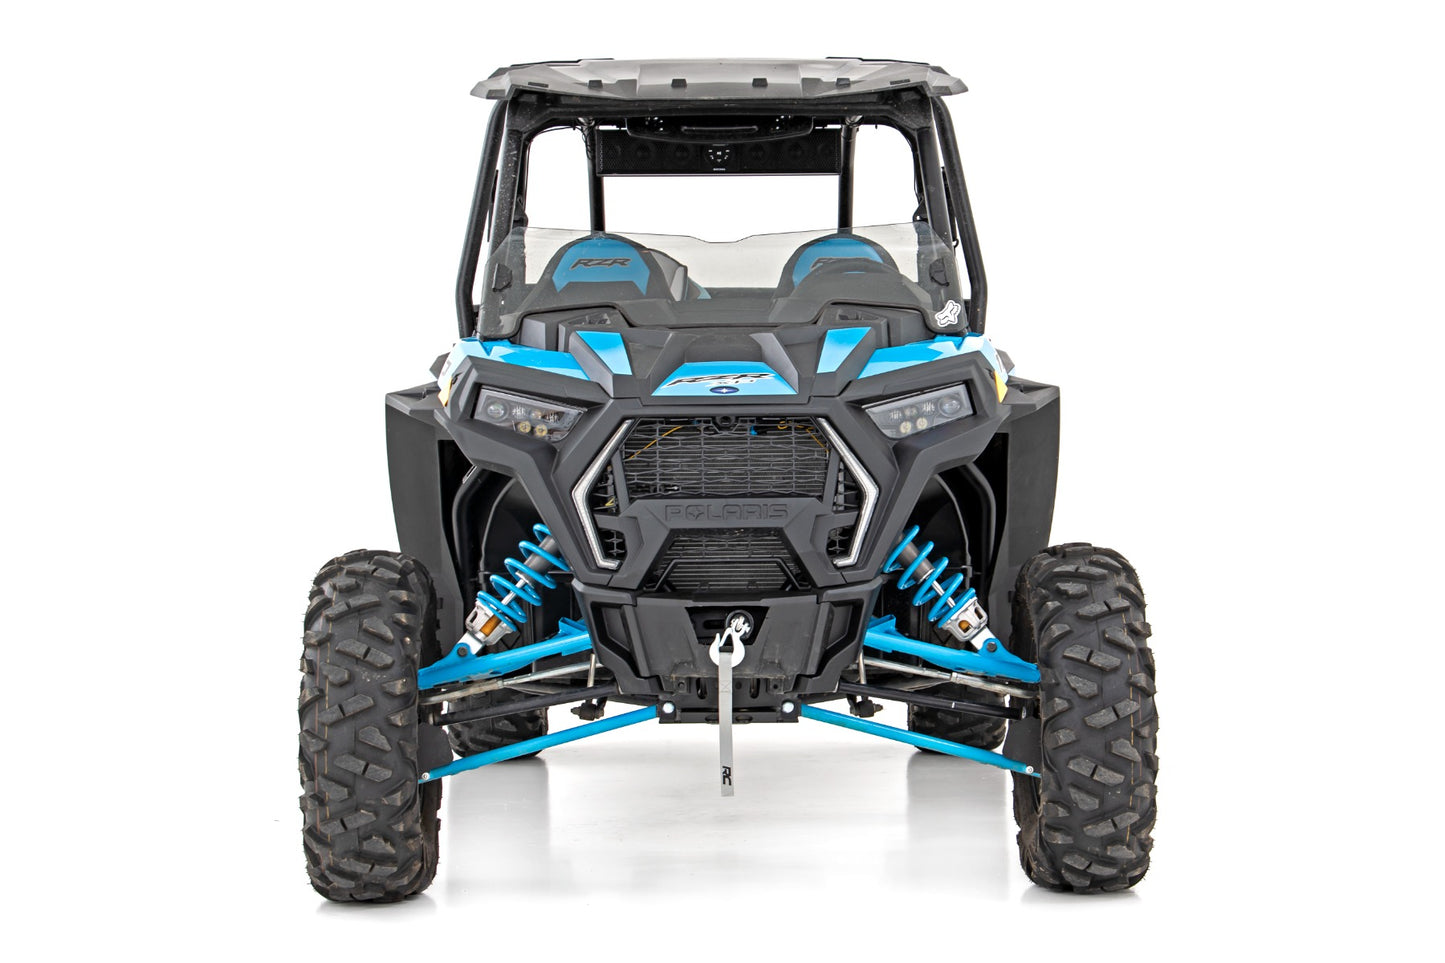 Rough Country LED Light Kit Front Fang 19-22 Polaris RZR XP 1000/RZR XP 1000 High Lifter Edition